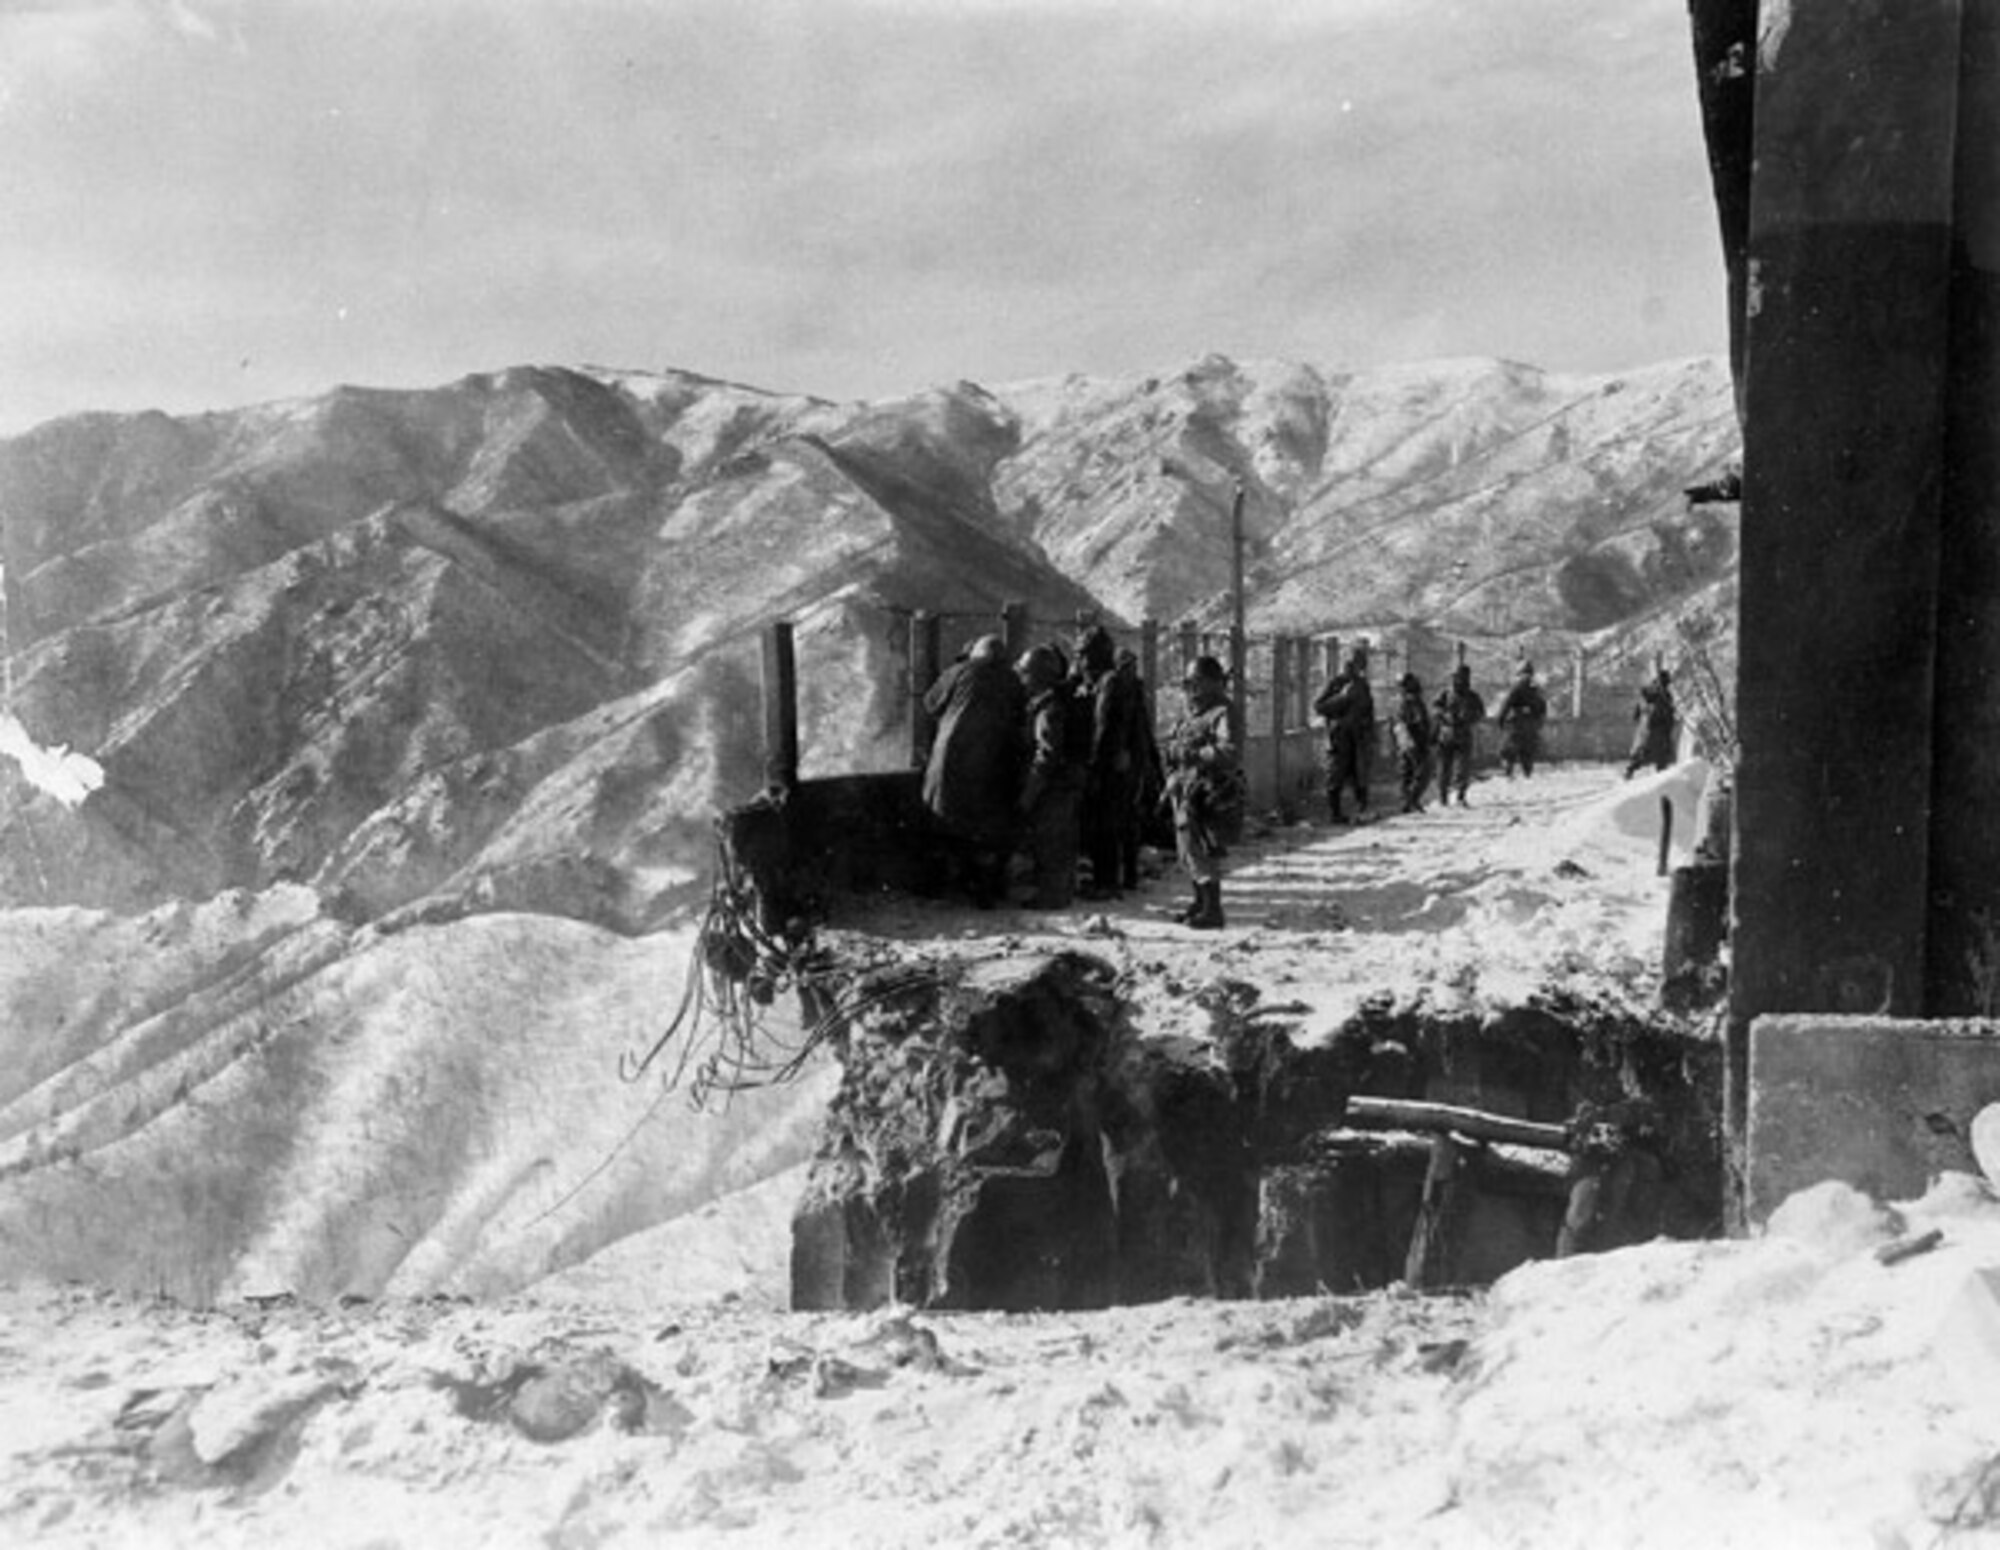 United Nation troops examine a road bridge at the Koto-ri hydroelectric plant in North Korea. The 24-foot section of the road bridge was destroyed by Chinese 9th Army troops in late November 1950, trapping 30,000 UN troops on the north side between Koto-ri and the Chosin Reservoir.  (Courtesy Photo)